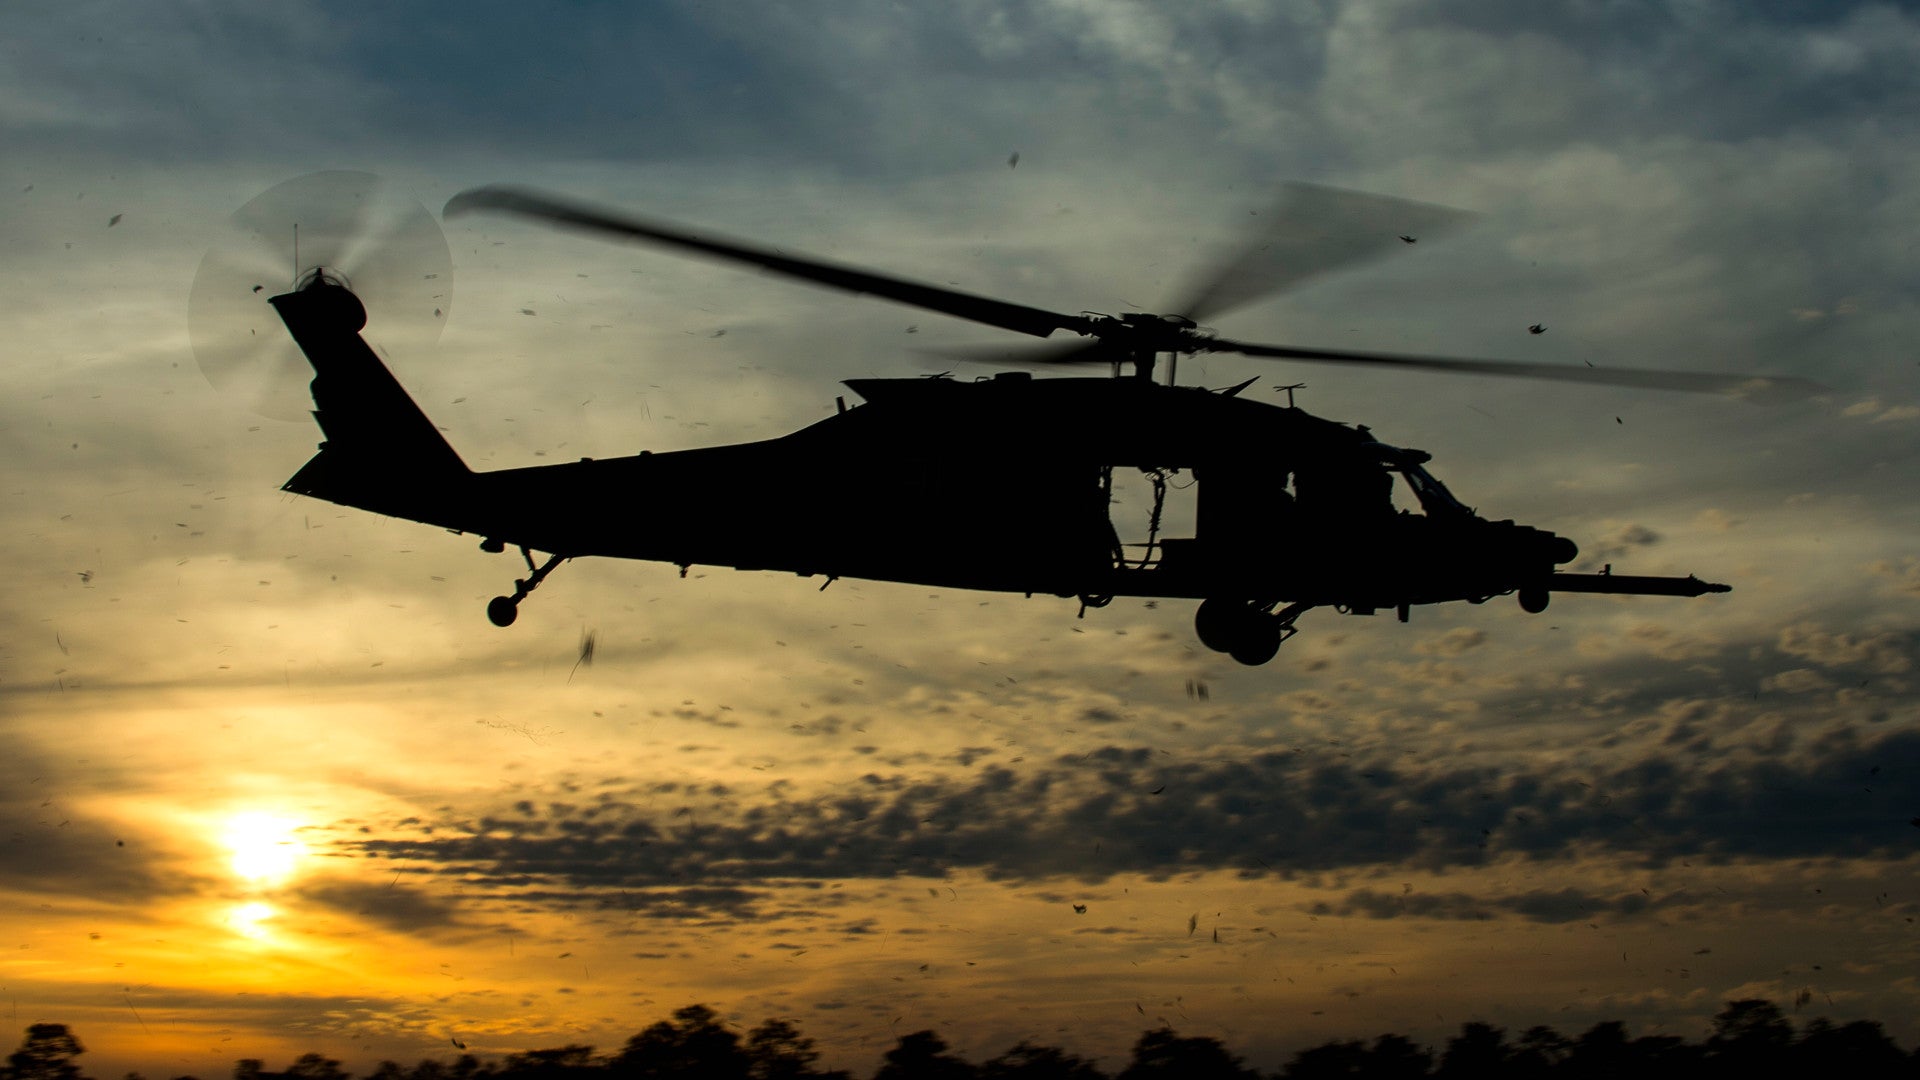 U.S. Helicopter Crash Kills One In Iraq After Reported Special Operations Raid